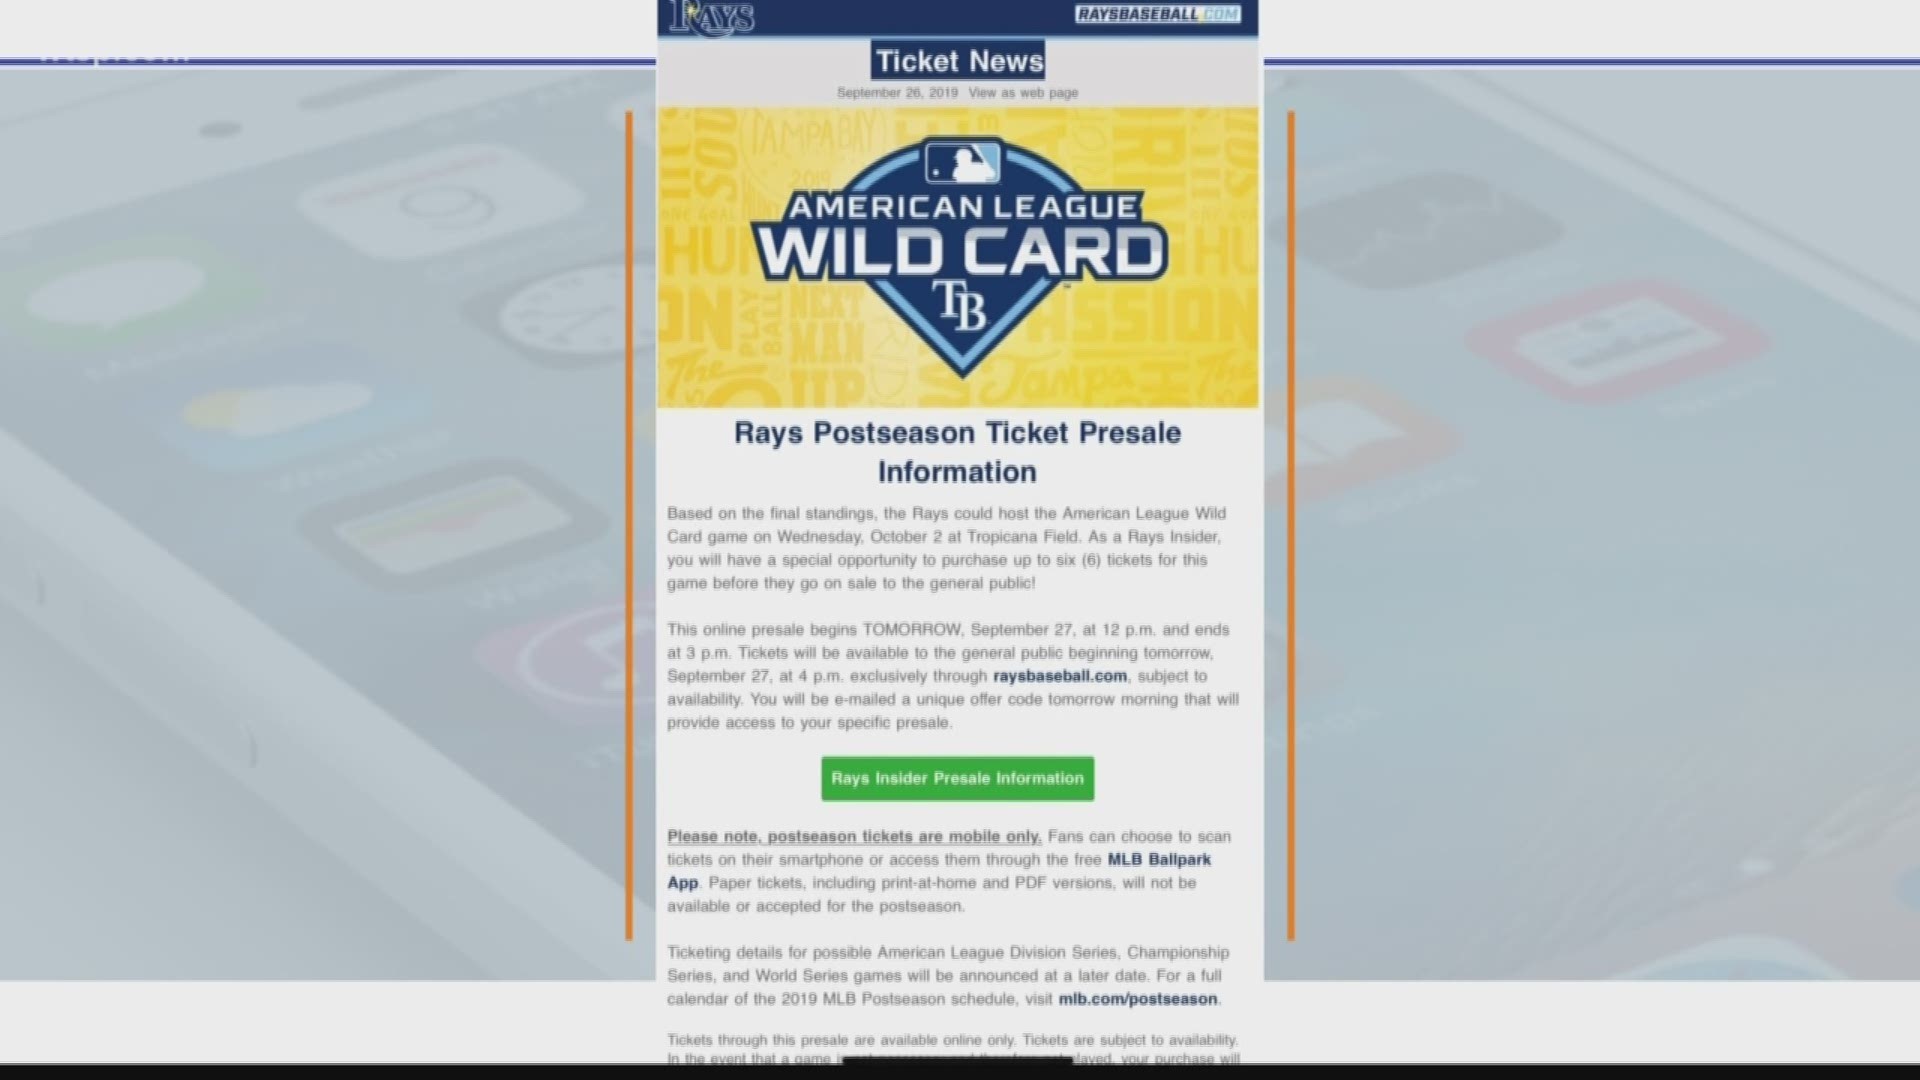 AL Wild Card tickets: The cheapest last-minute tickets for Rays vs. Rangers